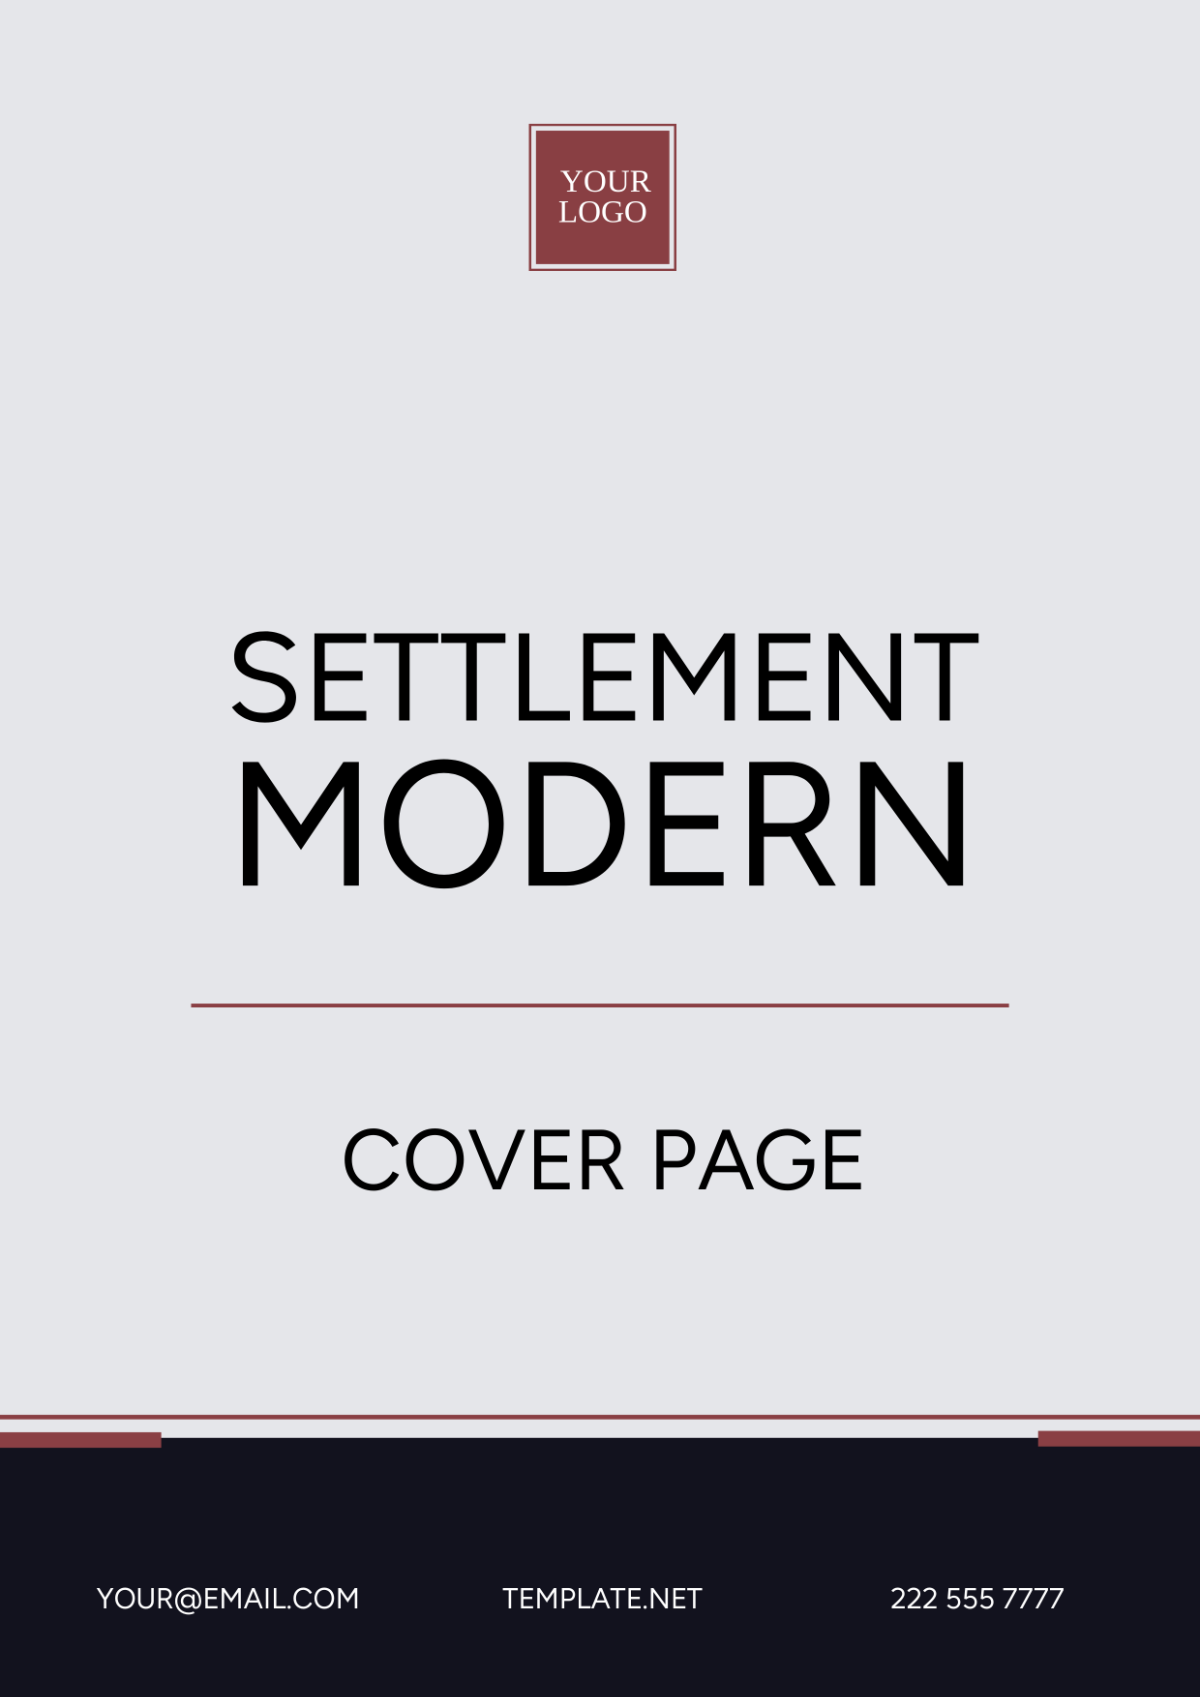 Free Settlement Modern Cover Page Template